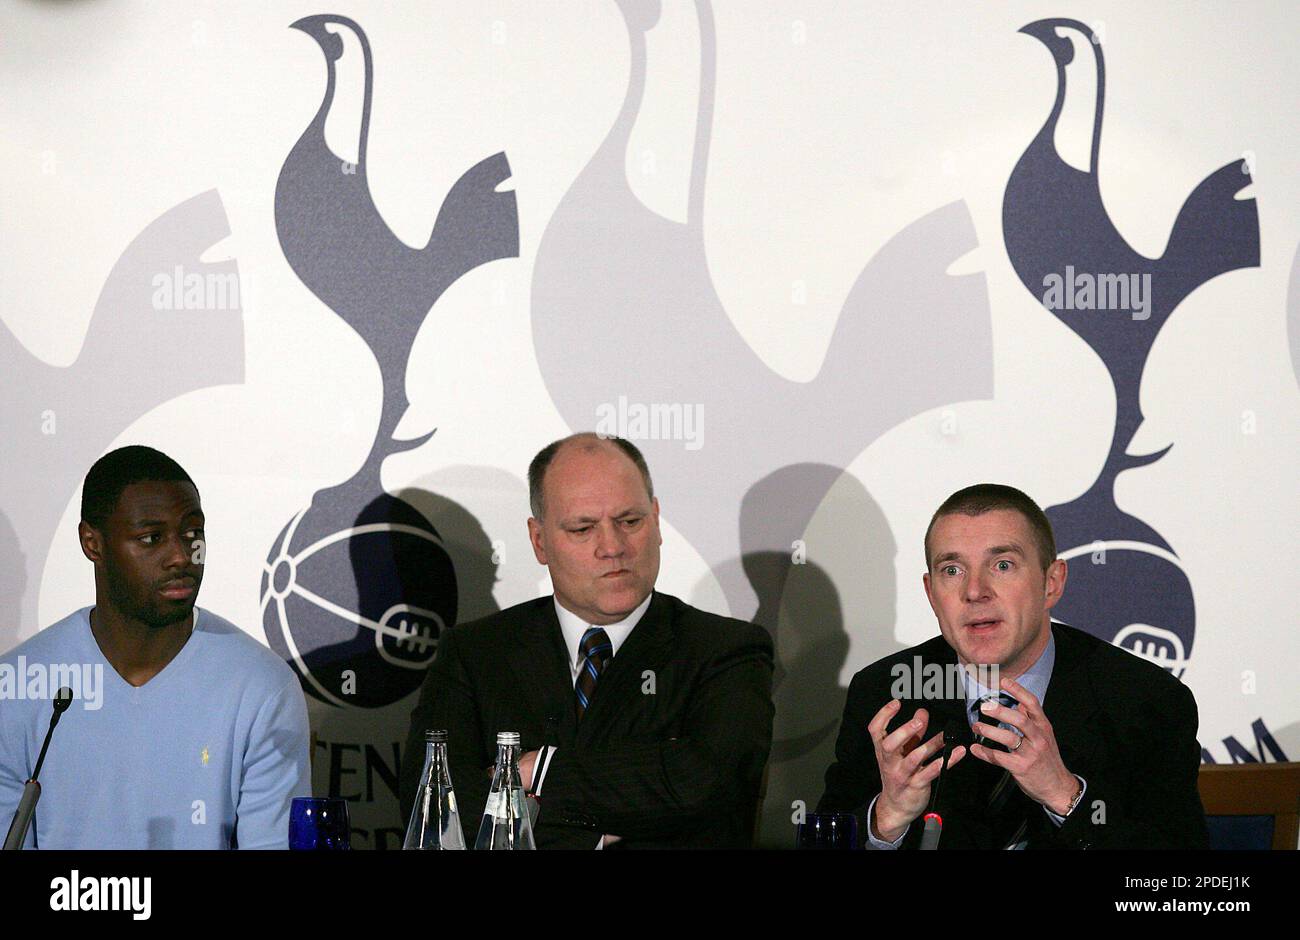 Officially official: Ledley King announced as Tottenham's newest